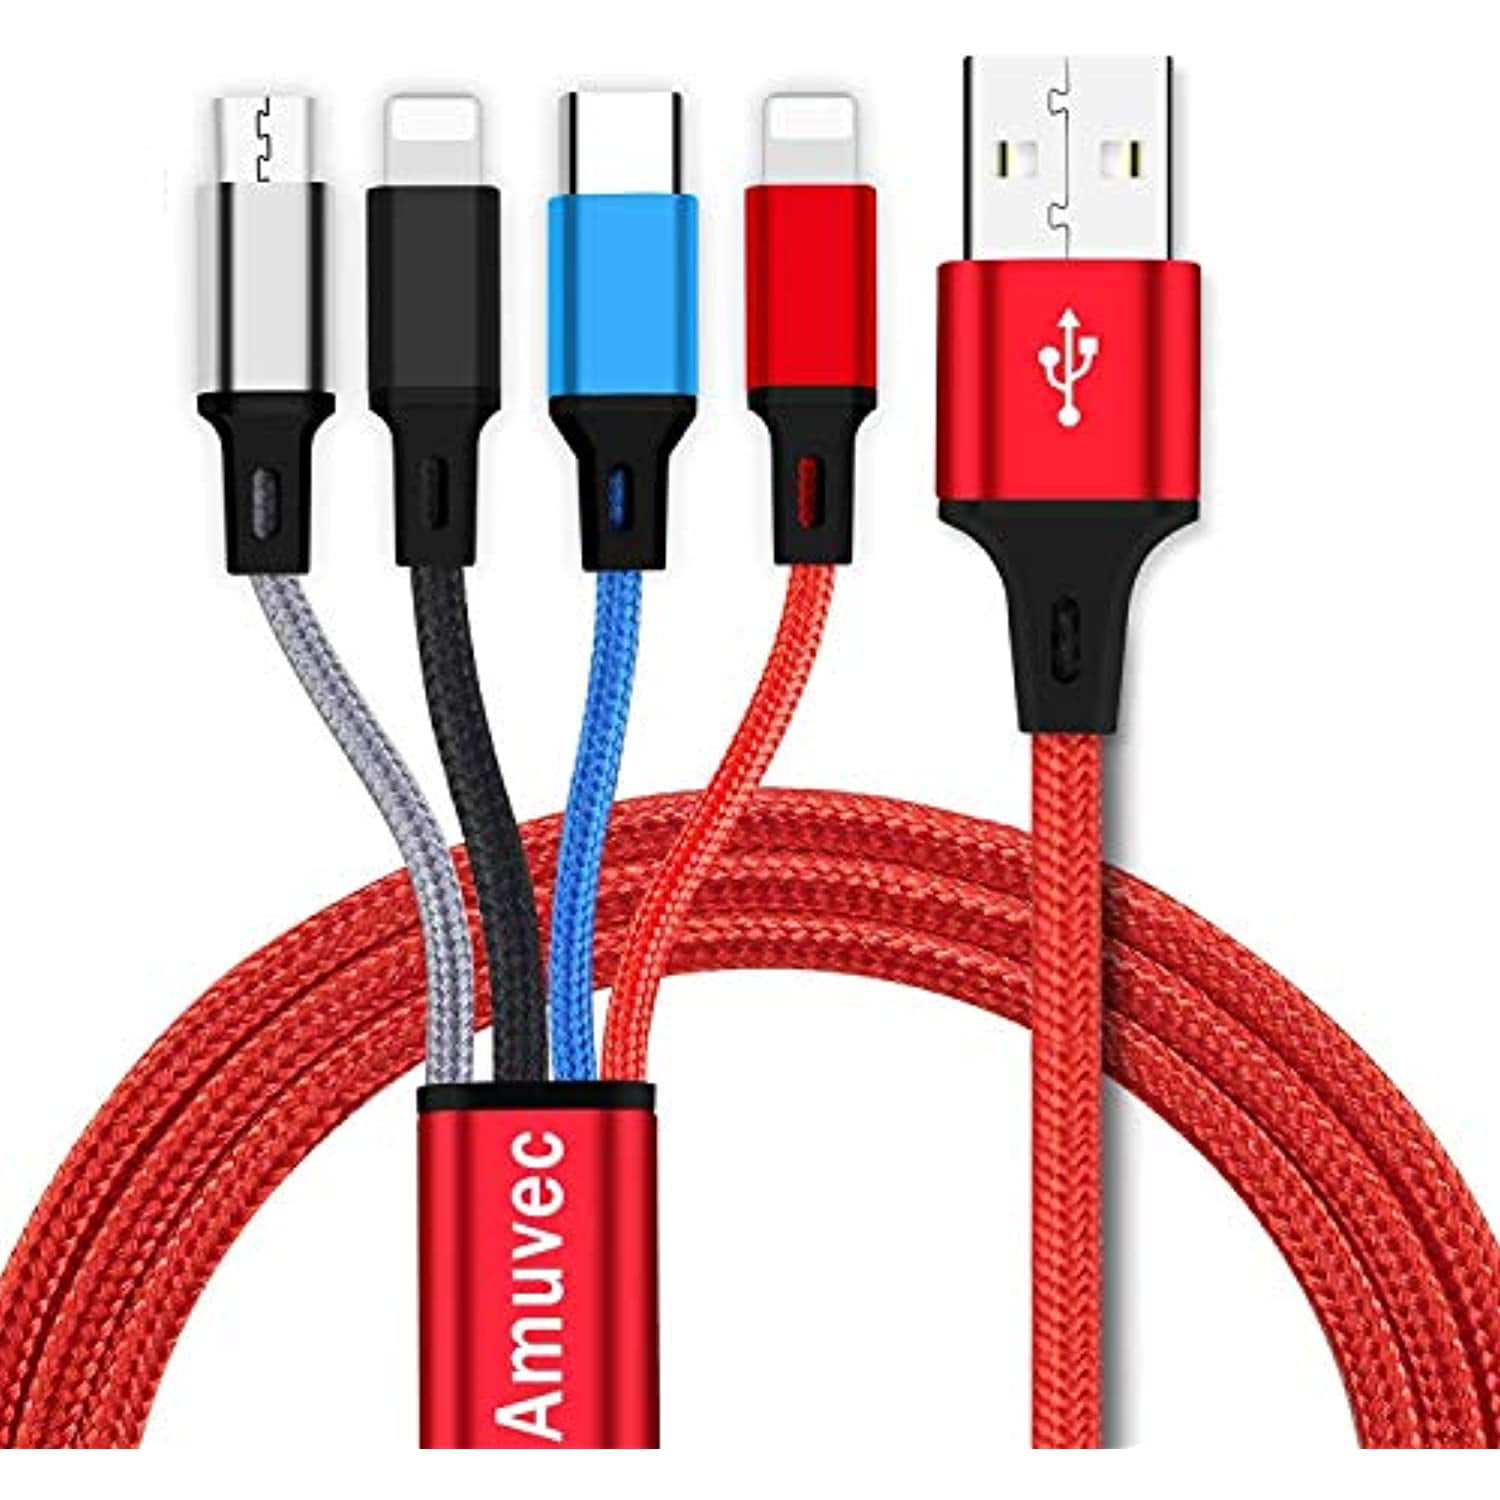 Flag of Oklahoma USB Charging Cable 3 in 1 Single Pull Retractable Fast Charger Cord Connector with Dual Phone/Type C/Micro USB Port Compatible for All Phones with Tablets 